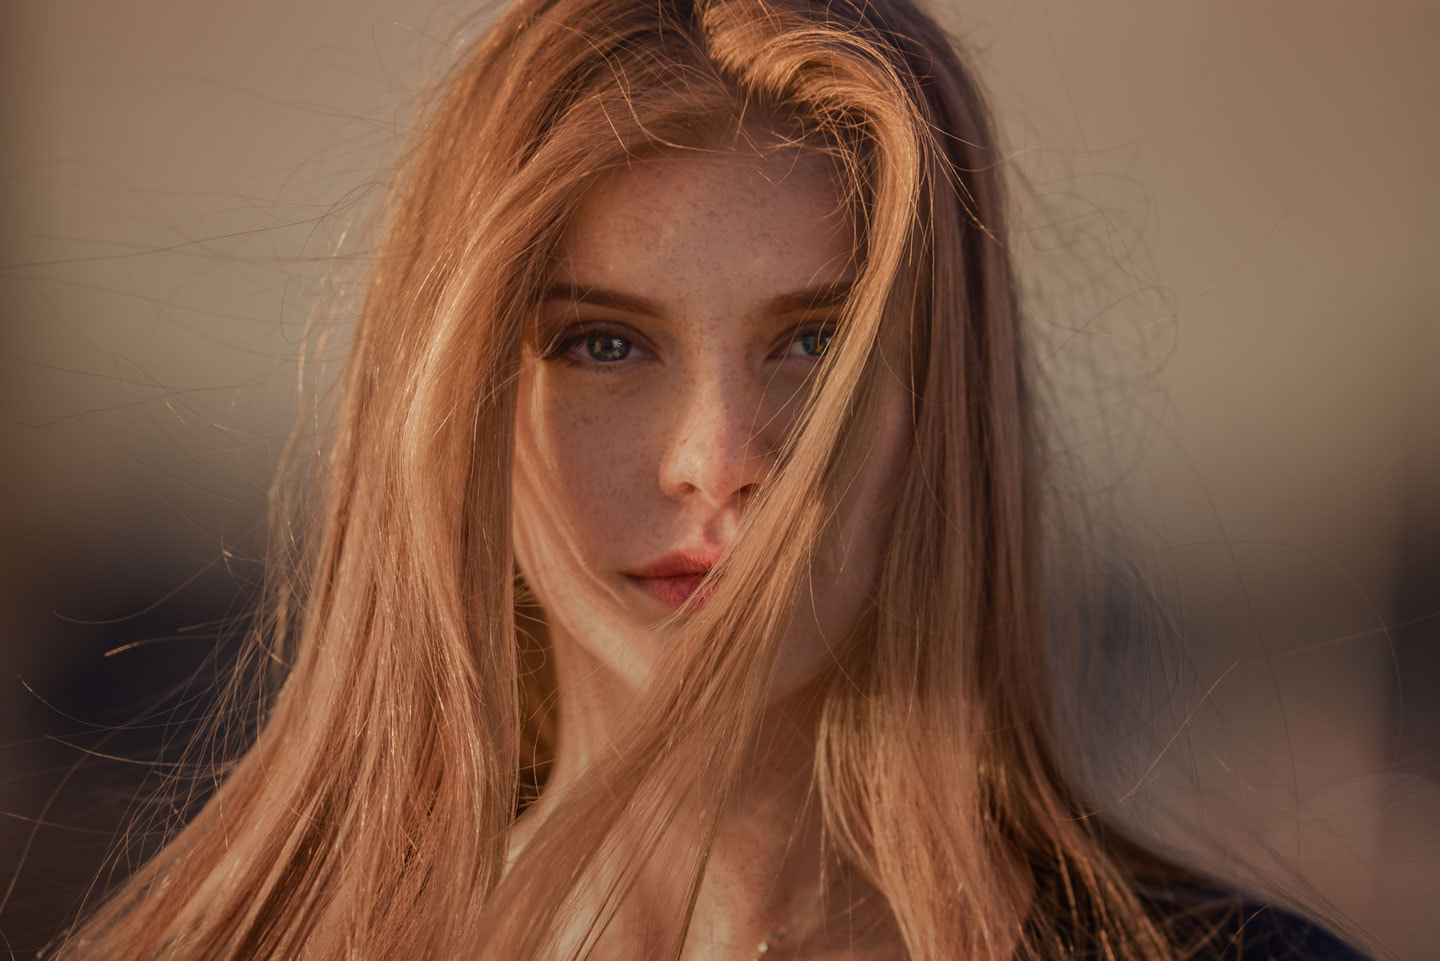 People 1440x961 women portrait freckles face redhead model blonde hair in face blurred